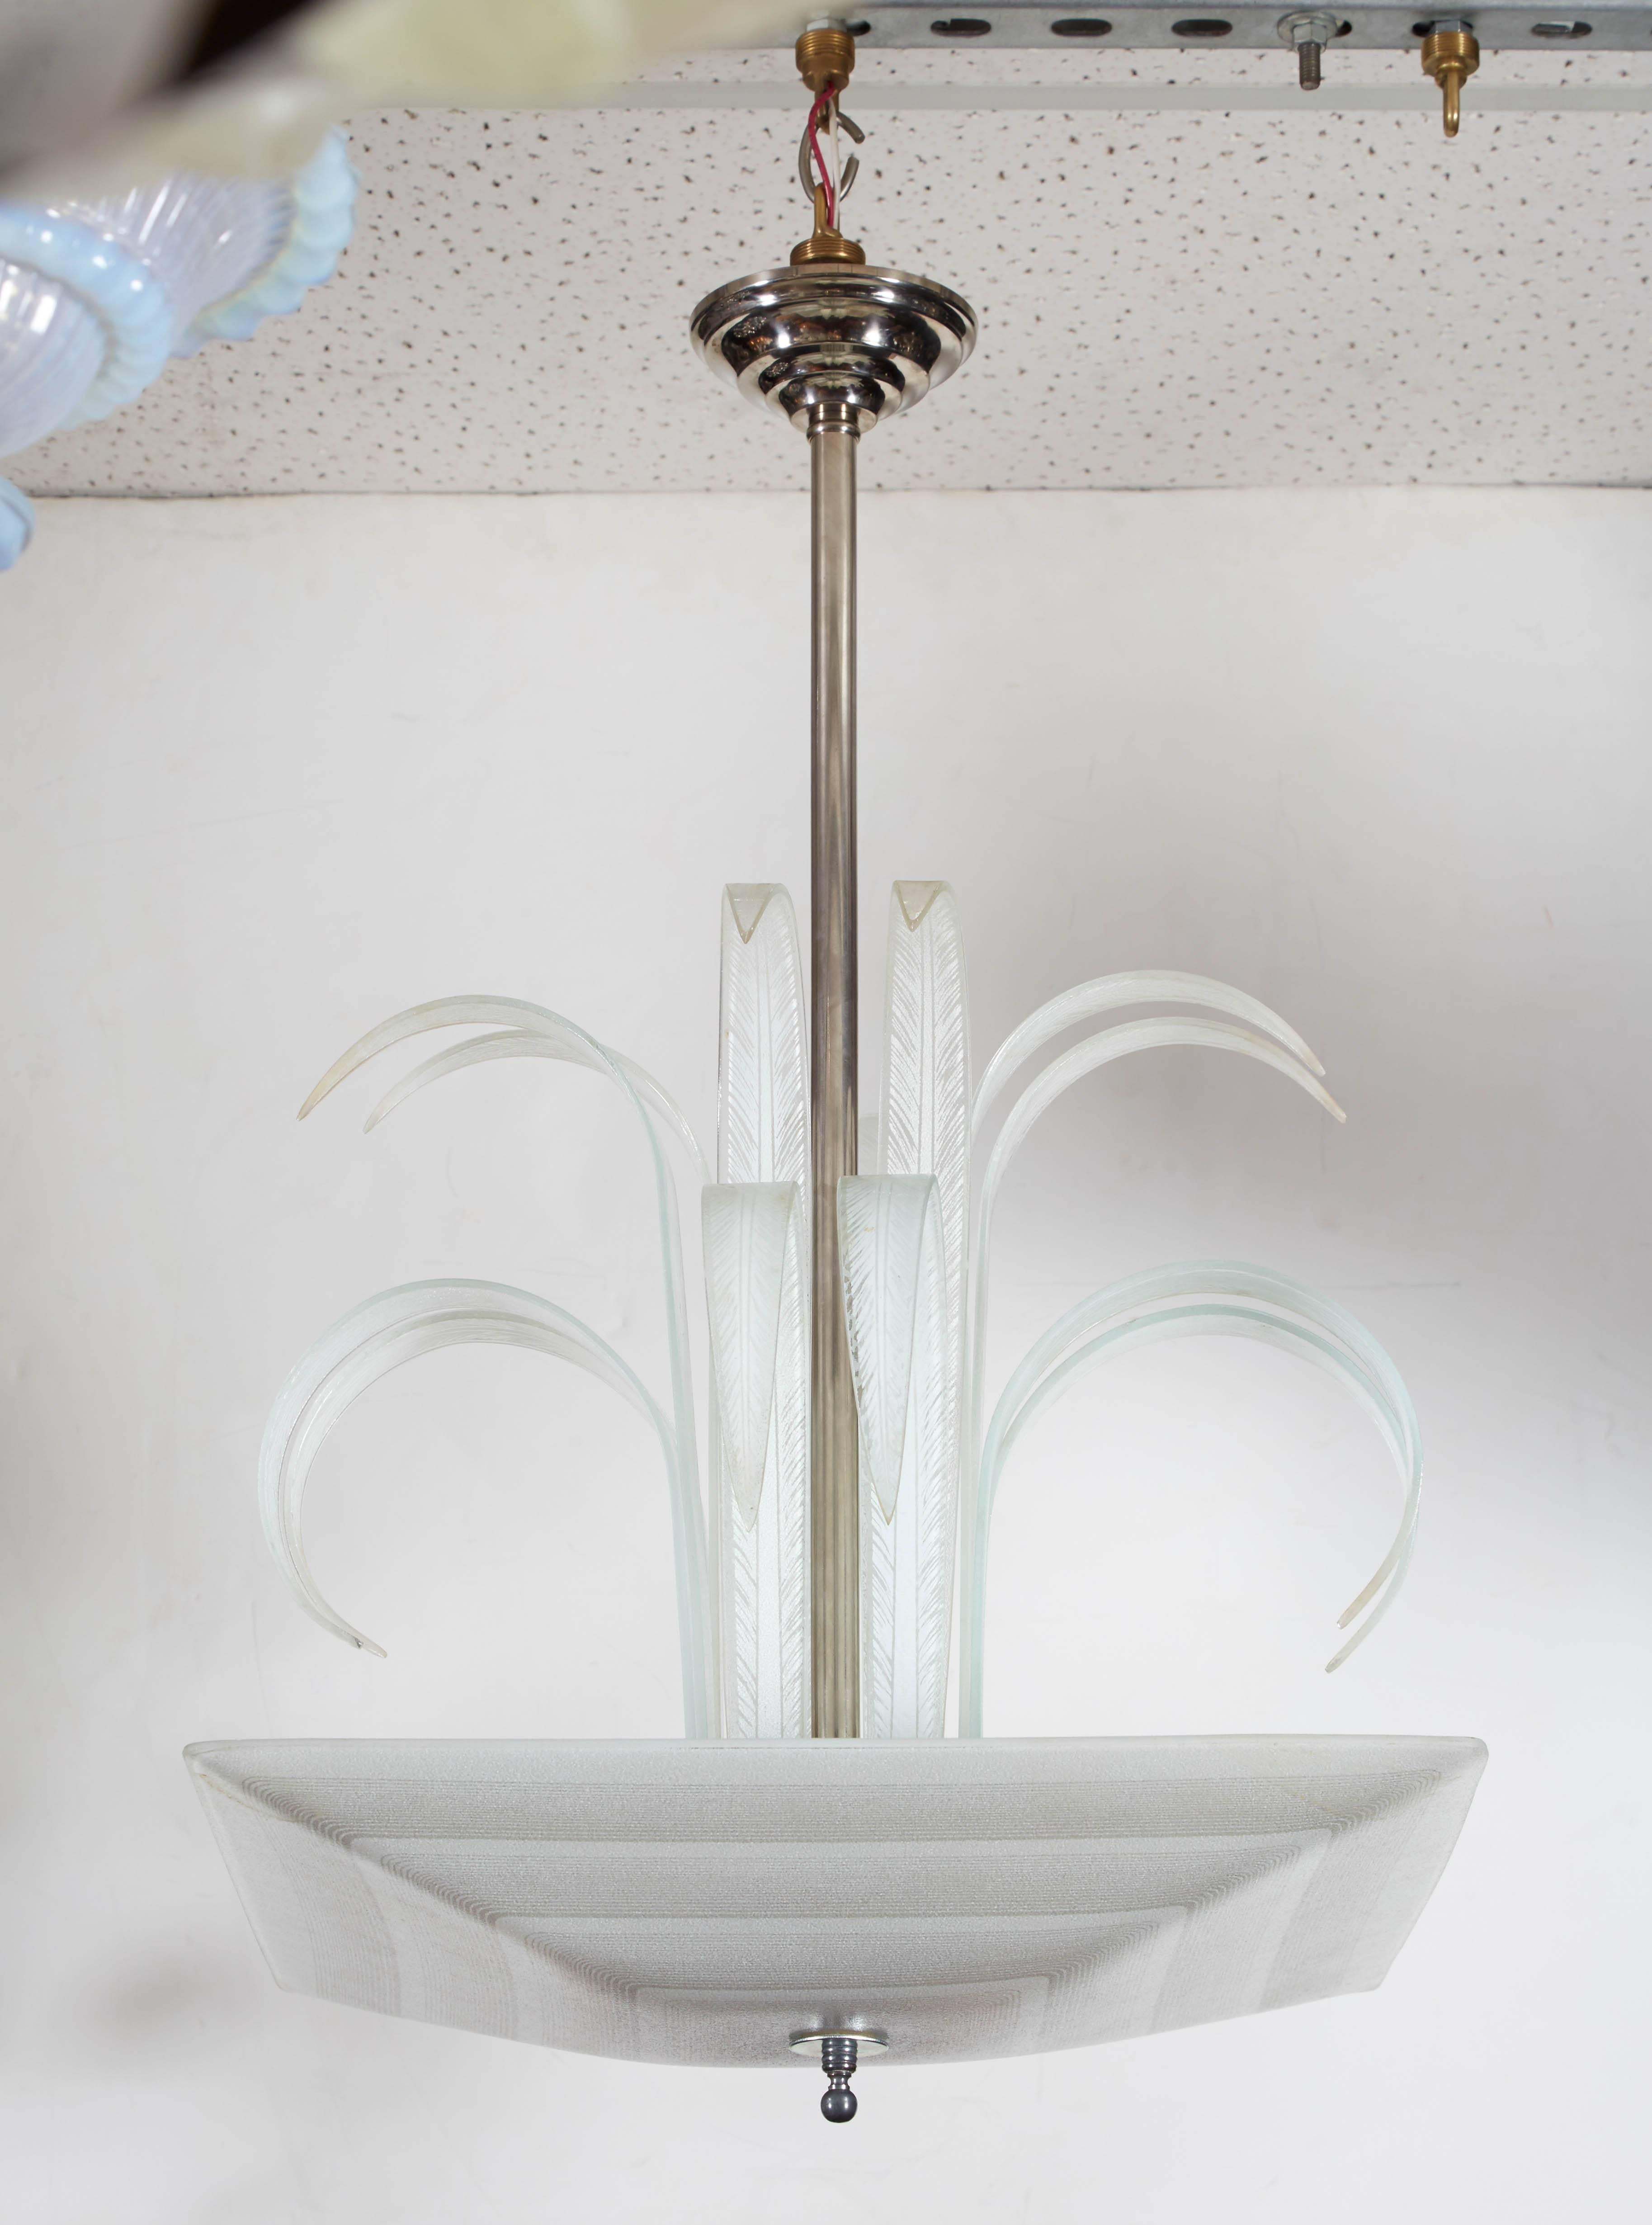 An unusual chandelier of organic modern design with dramatic crown plume of curled glass leaves in feathery palmette formation, surrounding a nickeled center stem, while holding a matching etched, stepped grey and white square bottom glass.
Can be